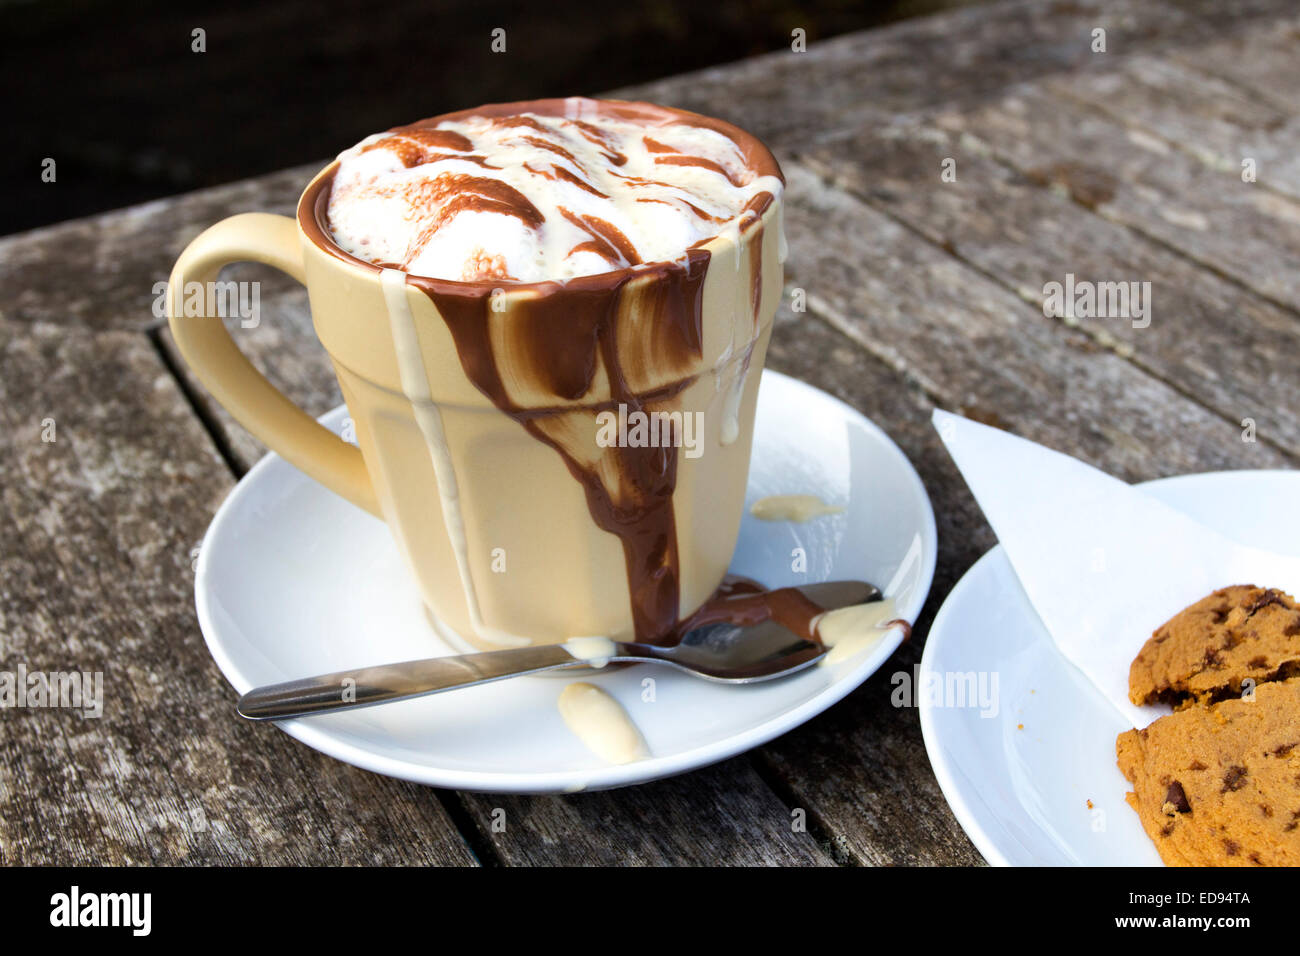 Decadent High Calorie Mug of Hot Chocolate Drink With Cookie Stock Photo